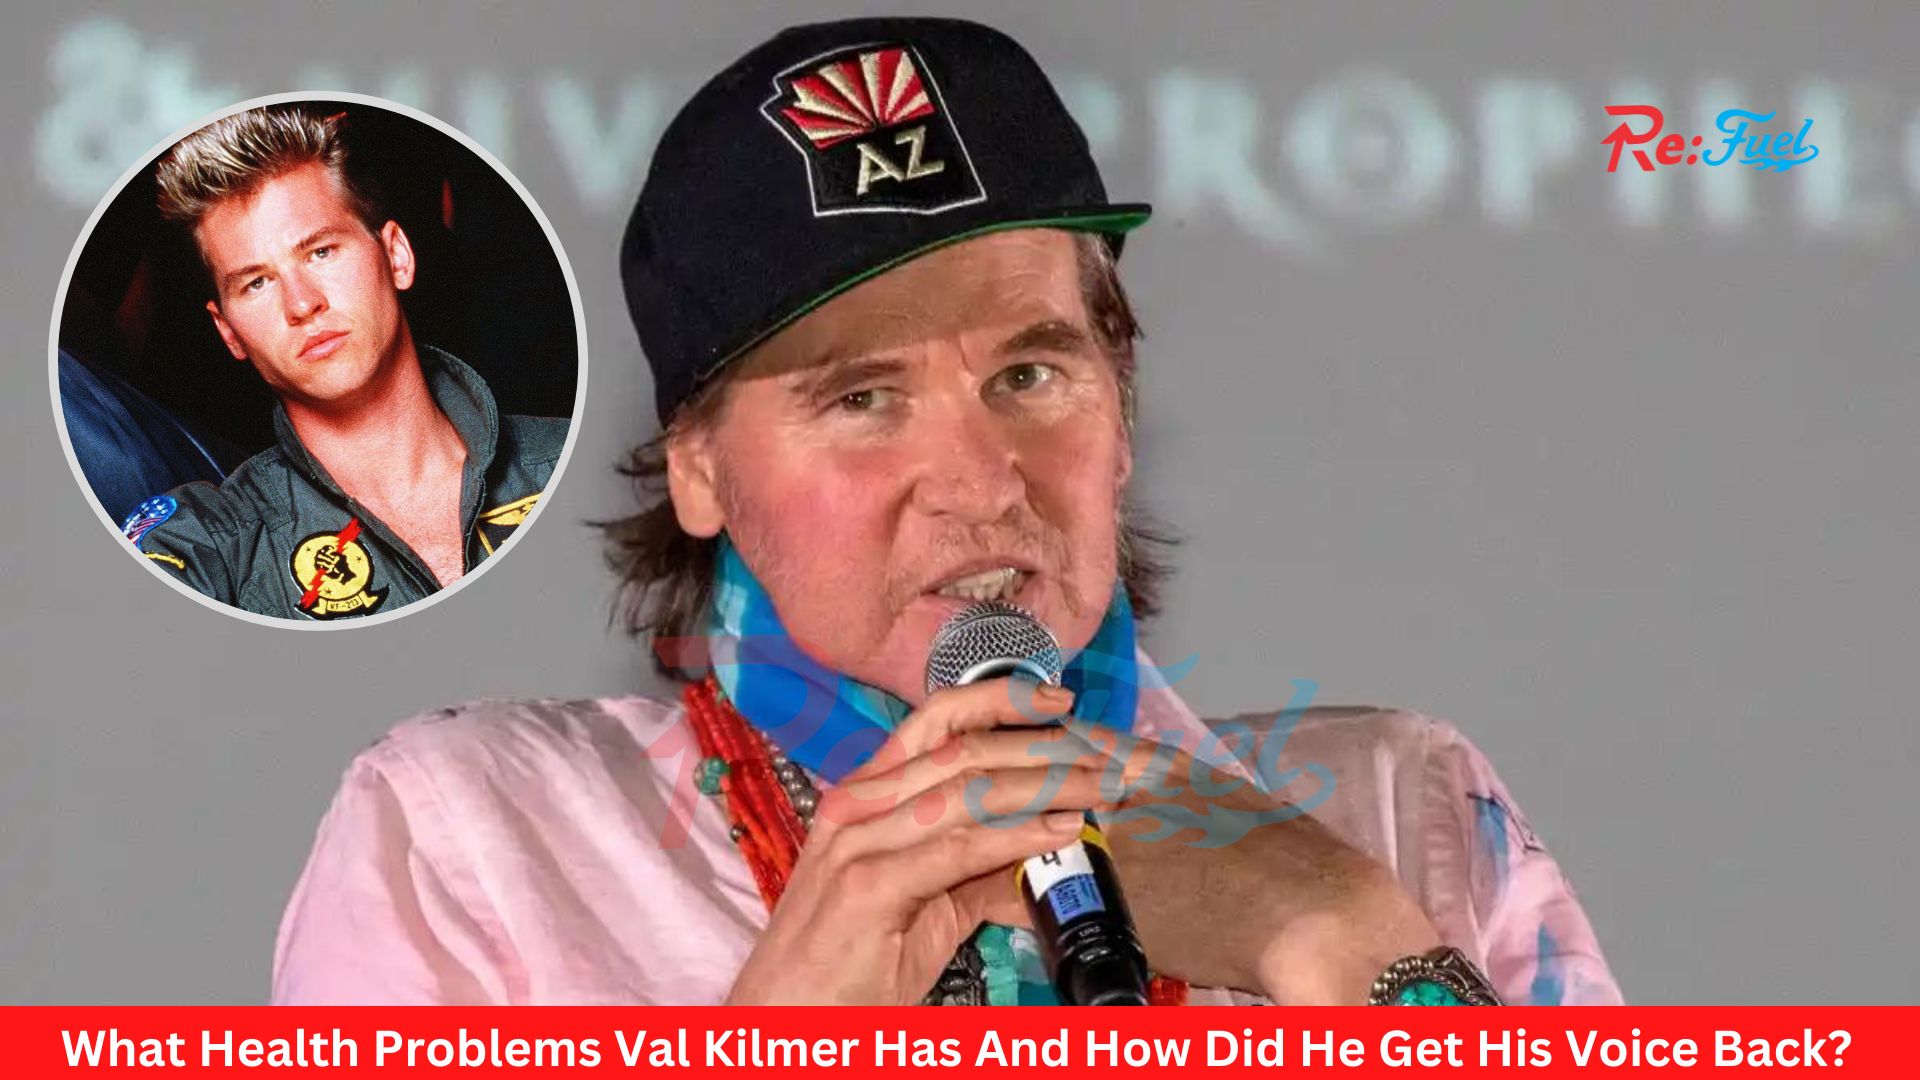 What Health Problems Val Kilmer Has And How Did He Get His Voice Back?